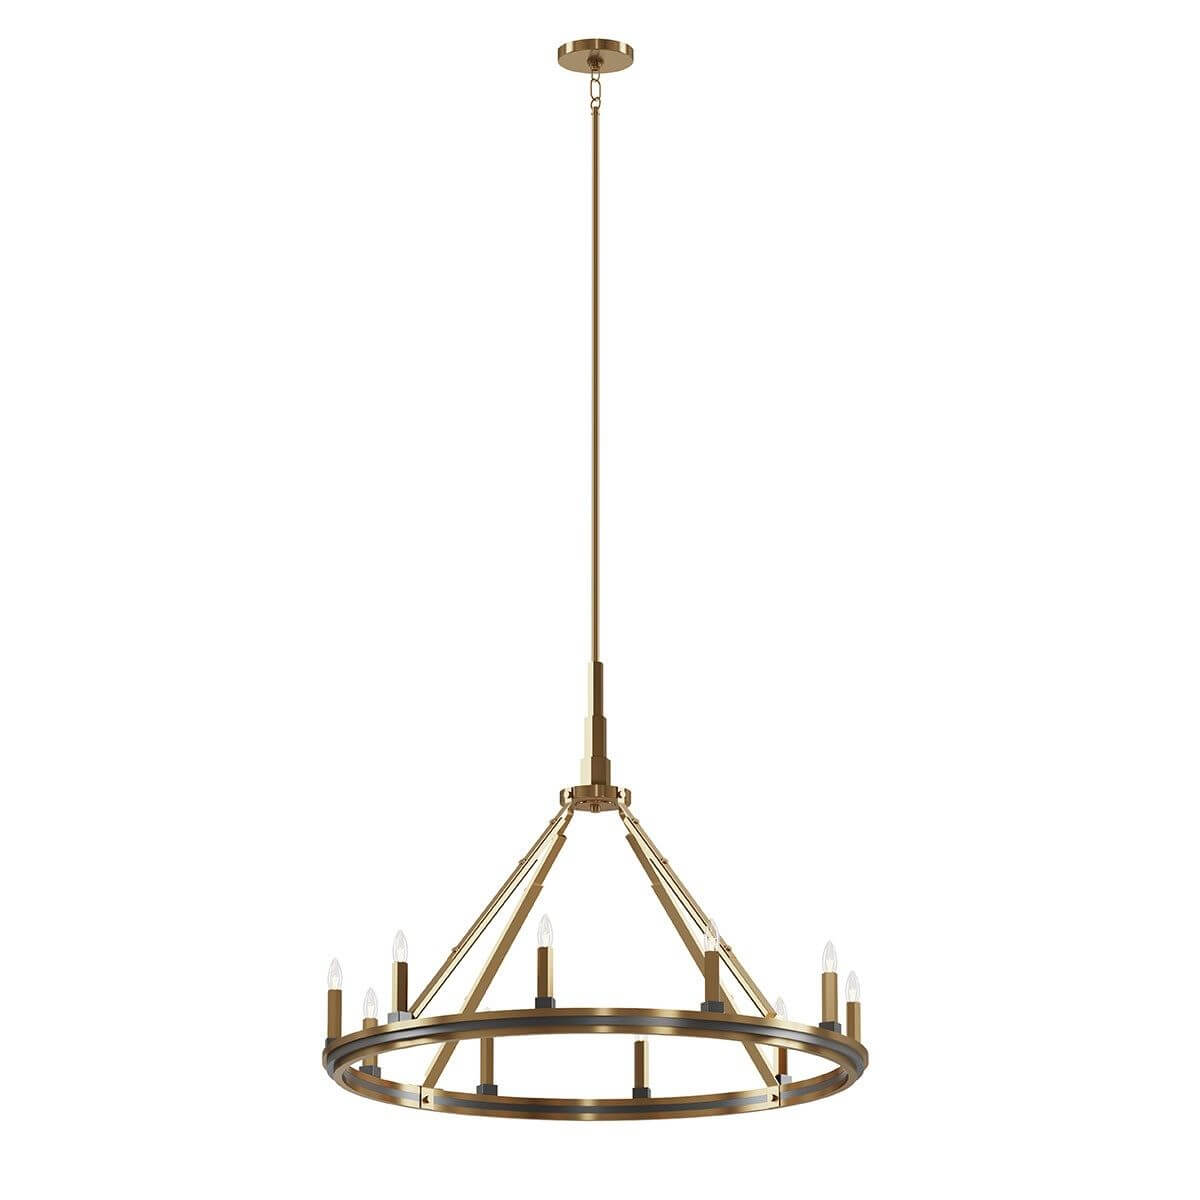 10 Light 34 inch Large Chandelier in Brushed Natural Brass - 233777